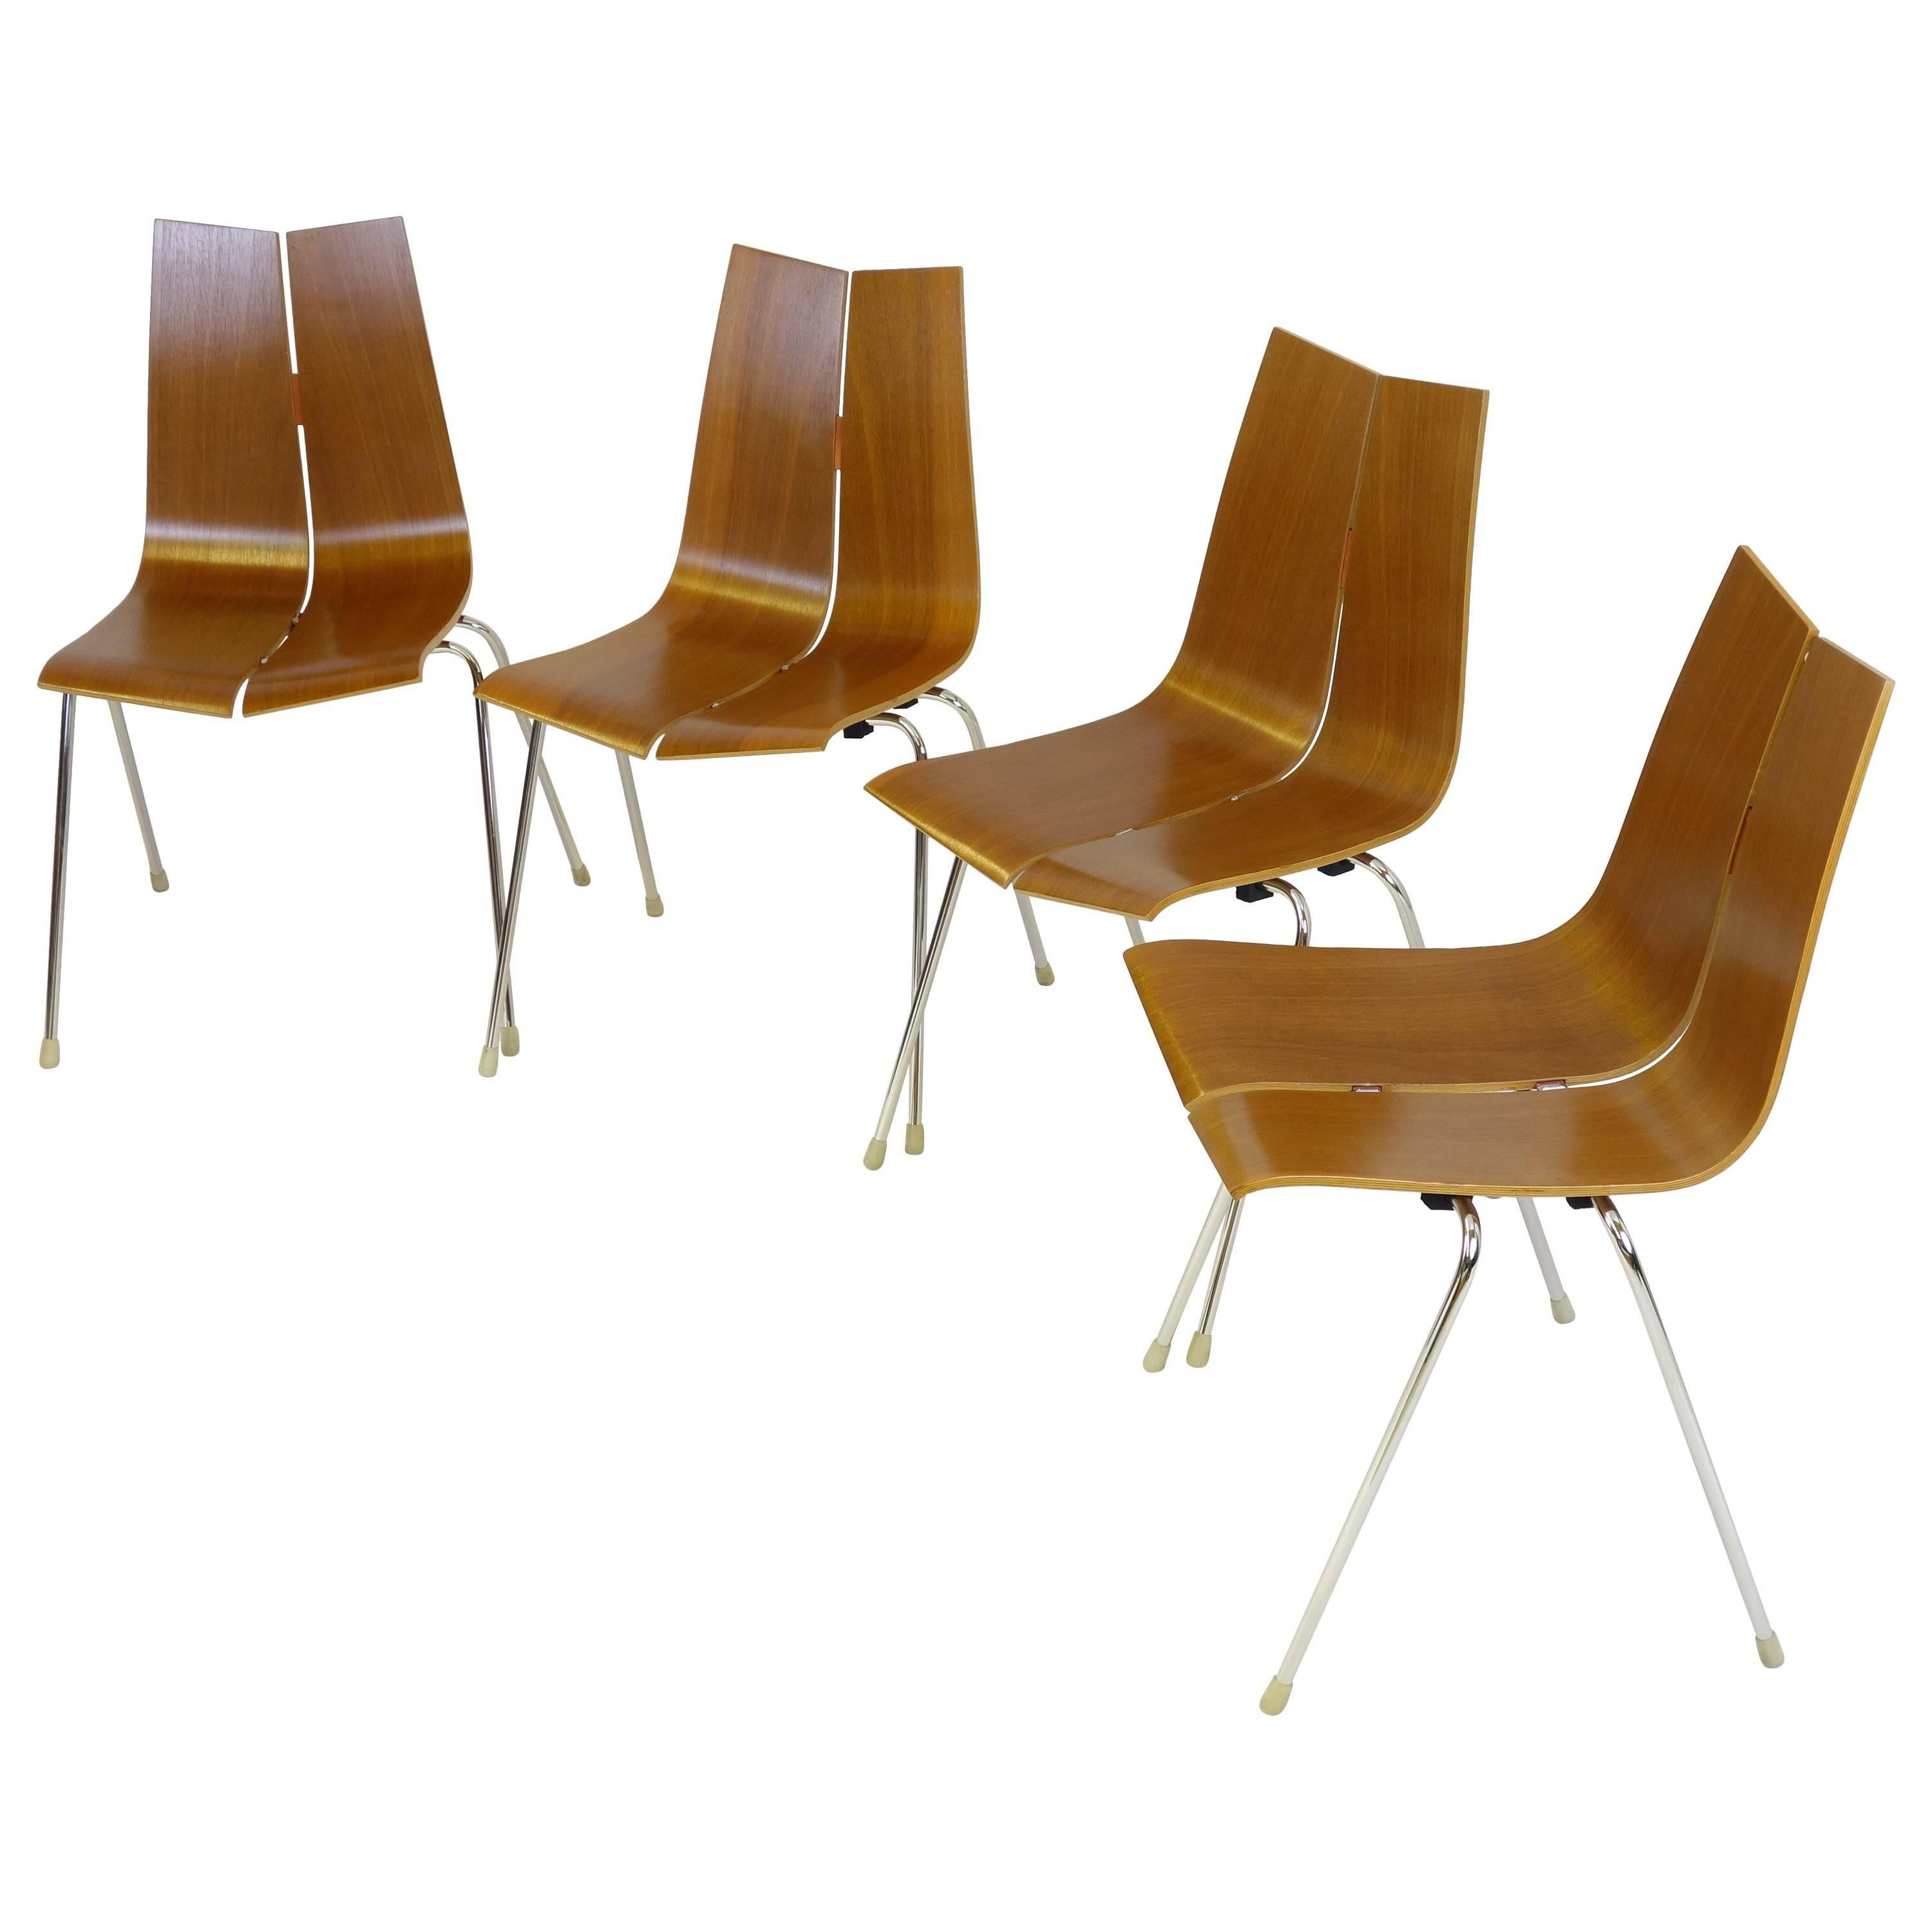 Stacking Chairs Designed by Hans Bellmann, Horgen-Glarus Seat Stool, 1952 For Sale